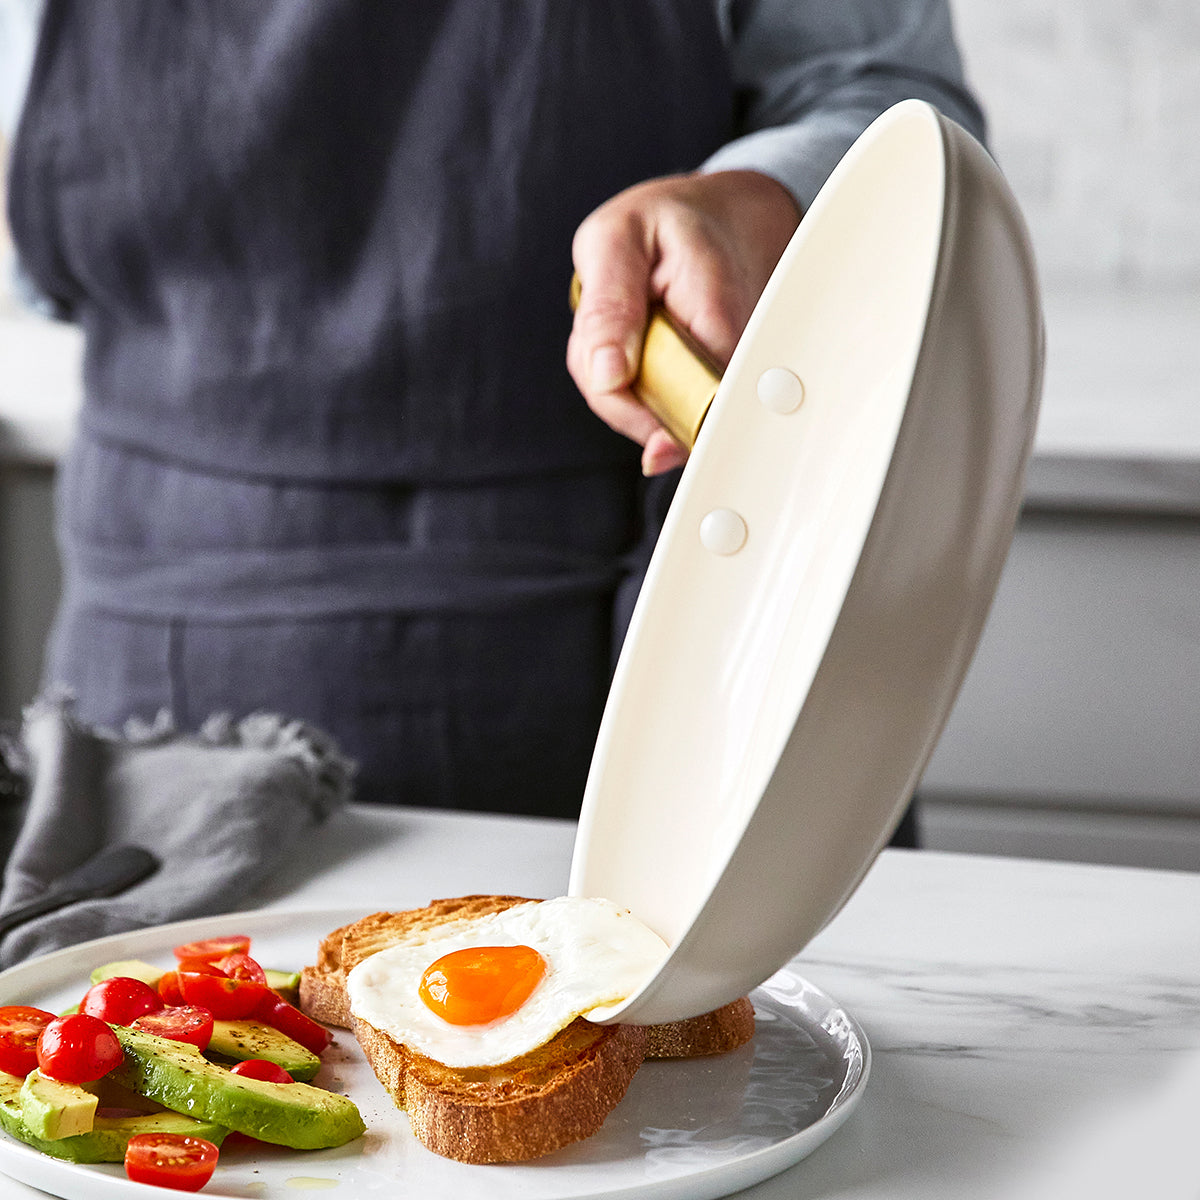 person sliding fried egg out of fry pan on the plate with toast, avocados and tomatoes.